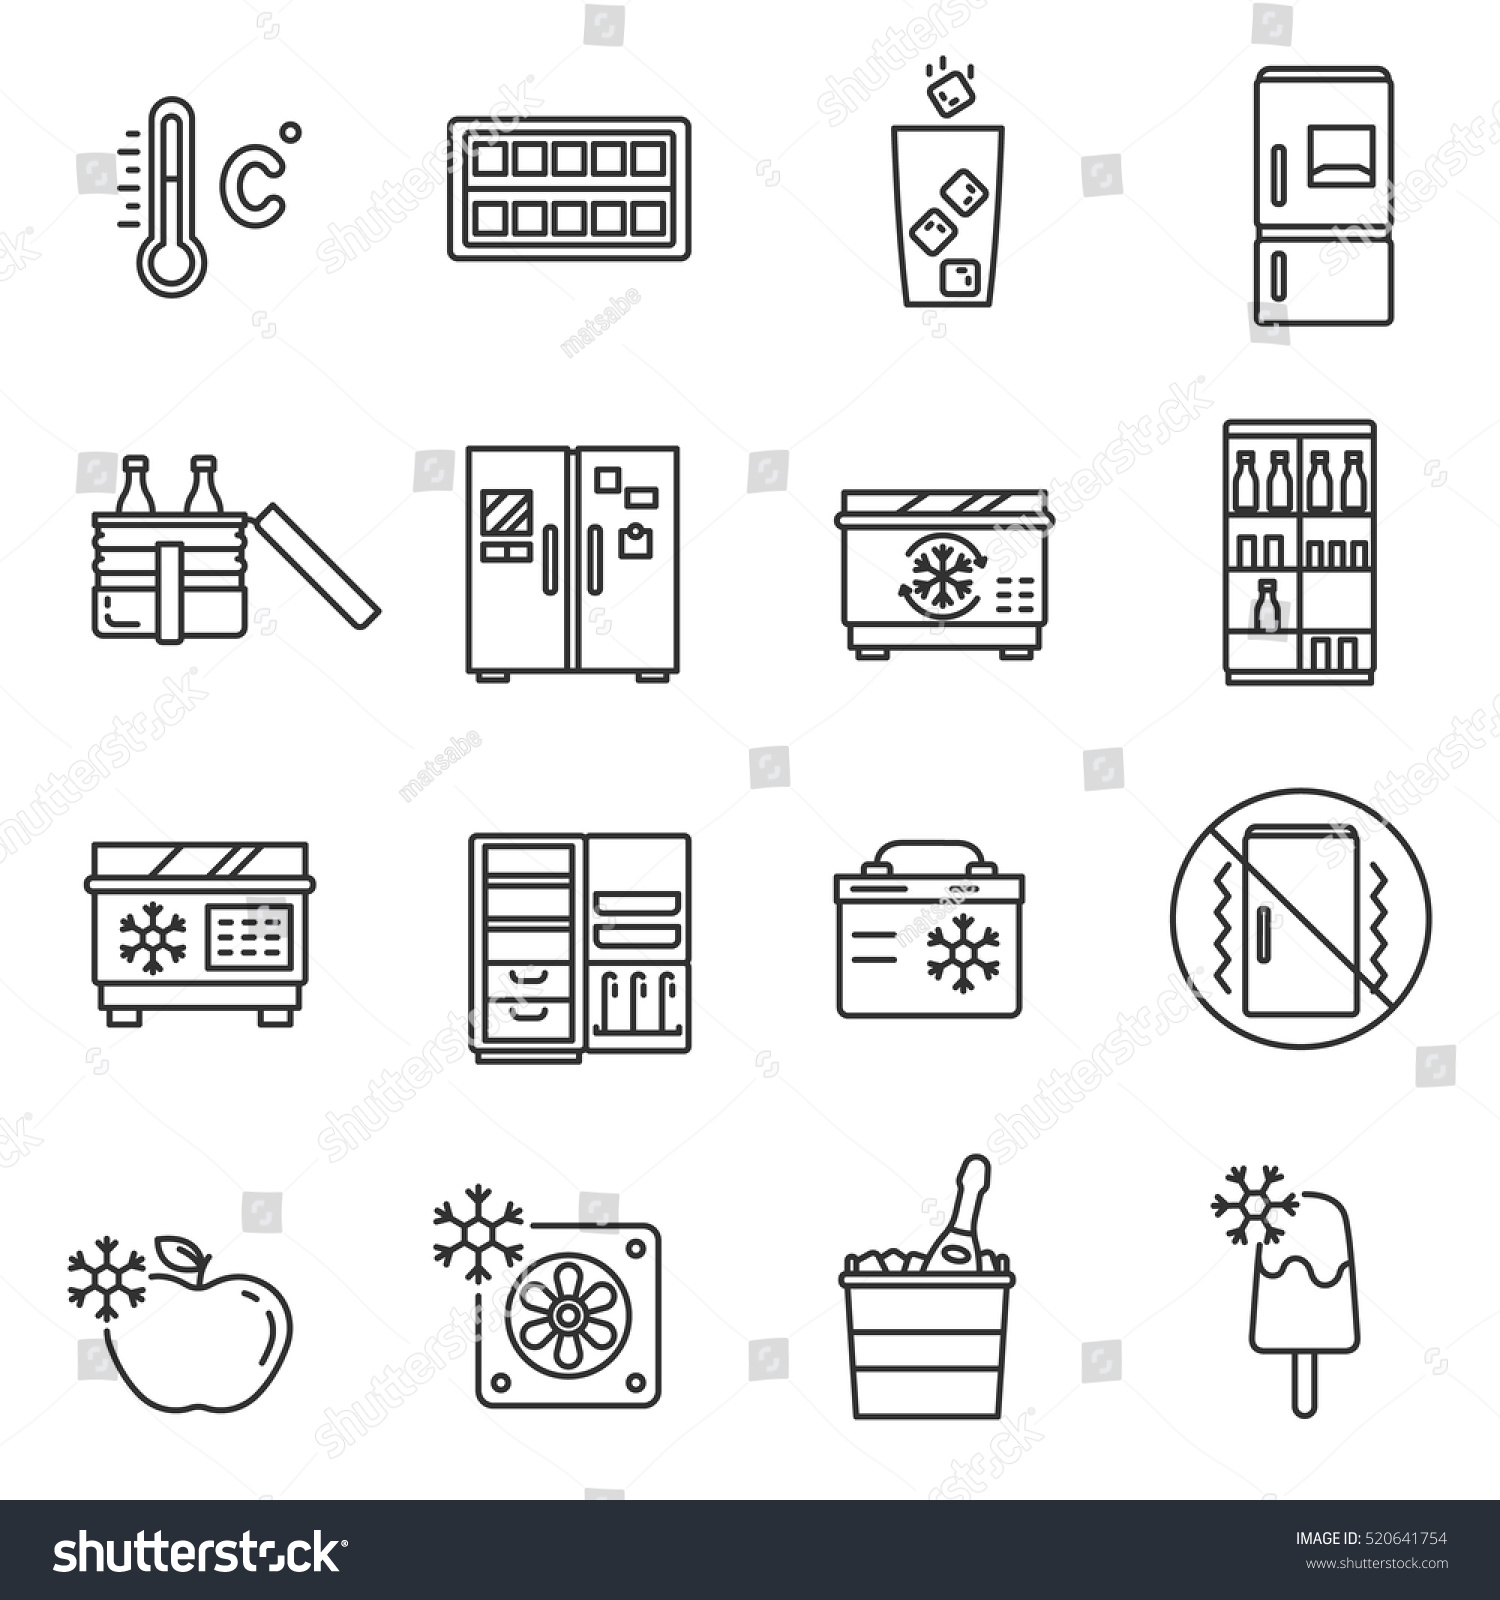 SVG of Fridge icon set. Cooling products, thin line design. Refrigerators for storing frozen products, linear symbols collection. Icons on cooling, isolated vector illustration. svg